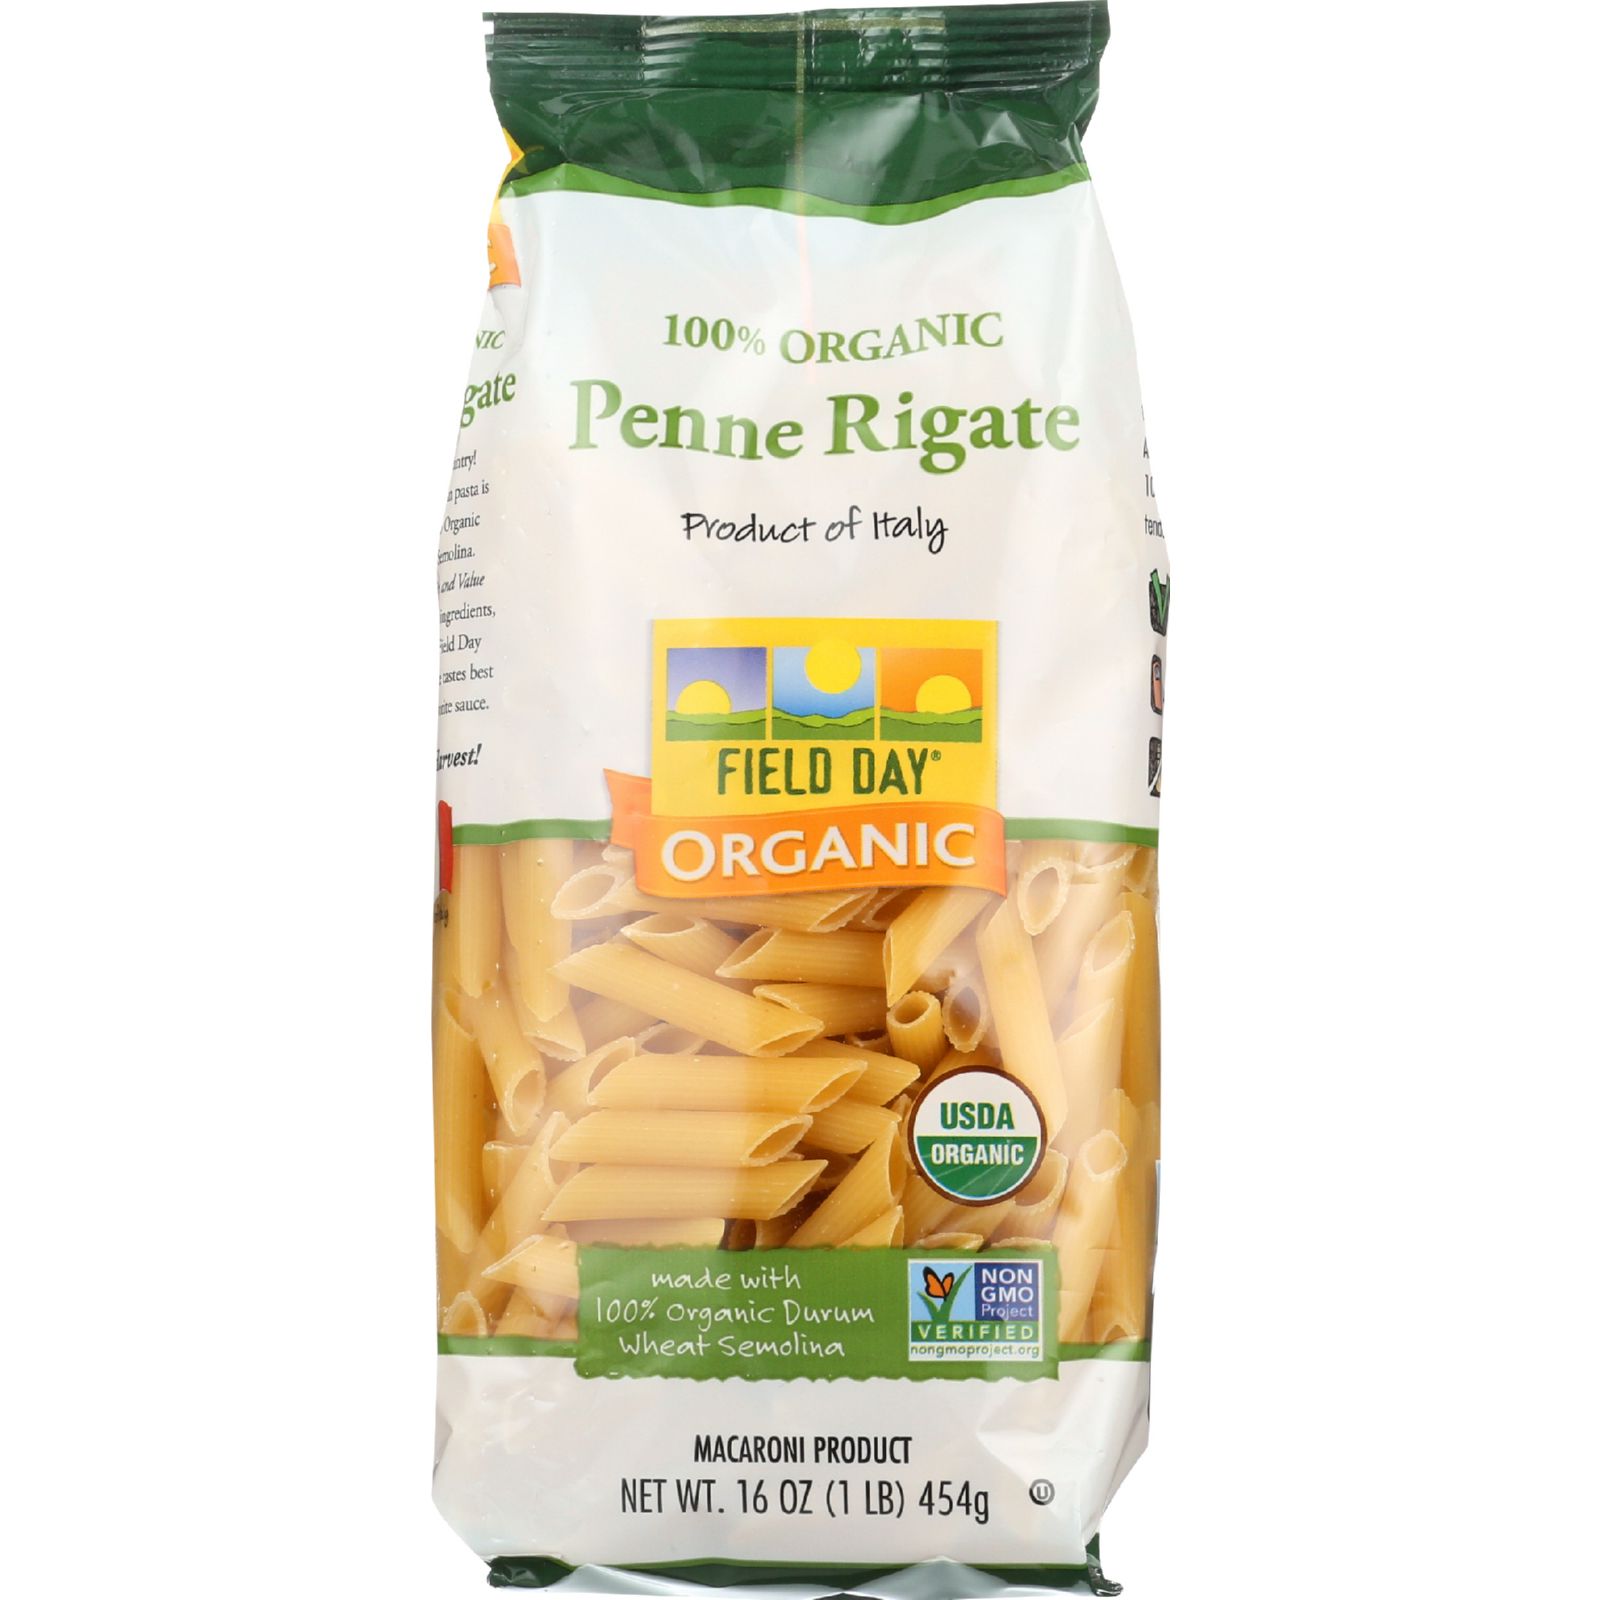 Field Day Traditional Penne Rigate Pasta (12x16 Oz)